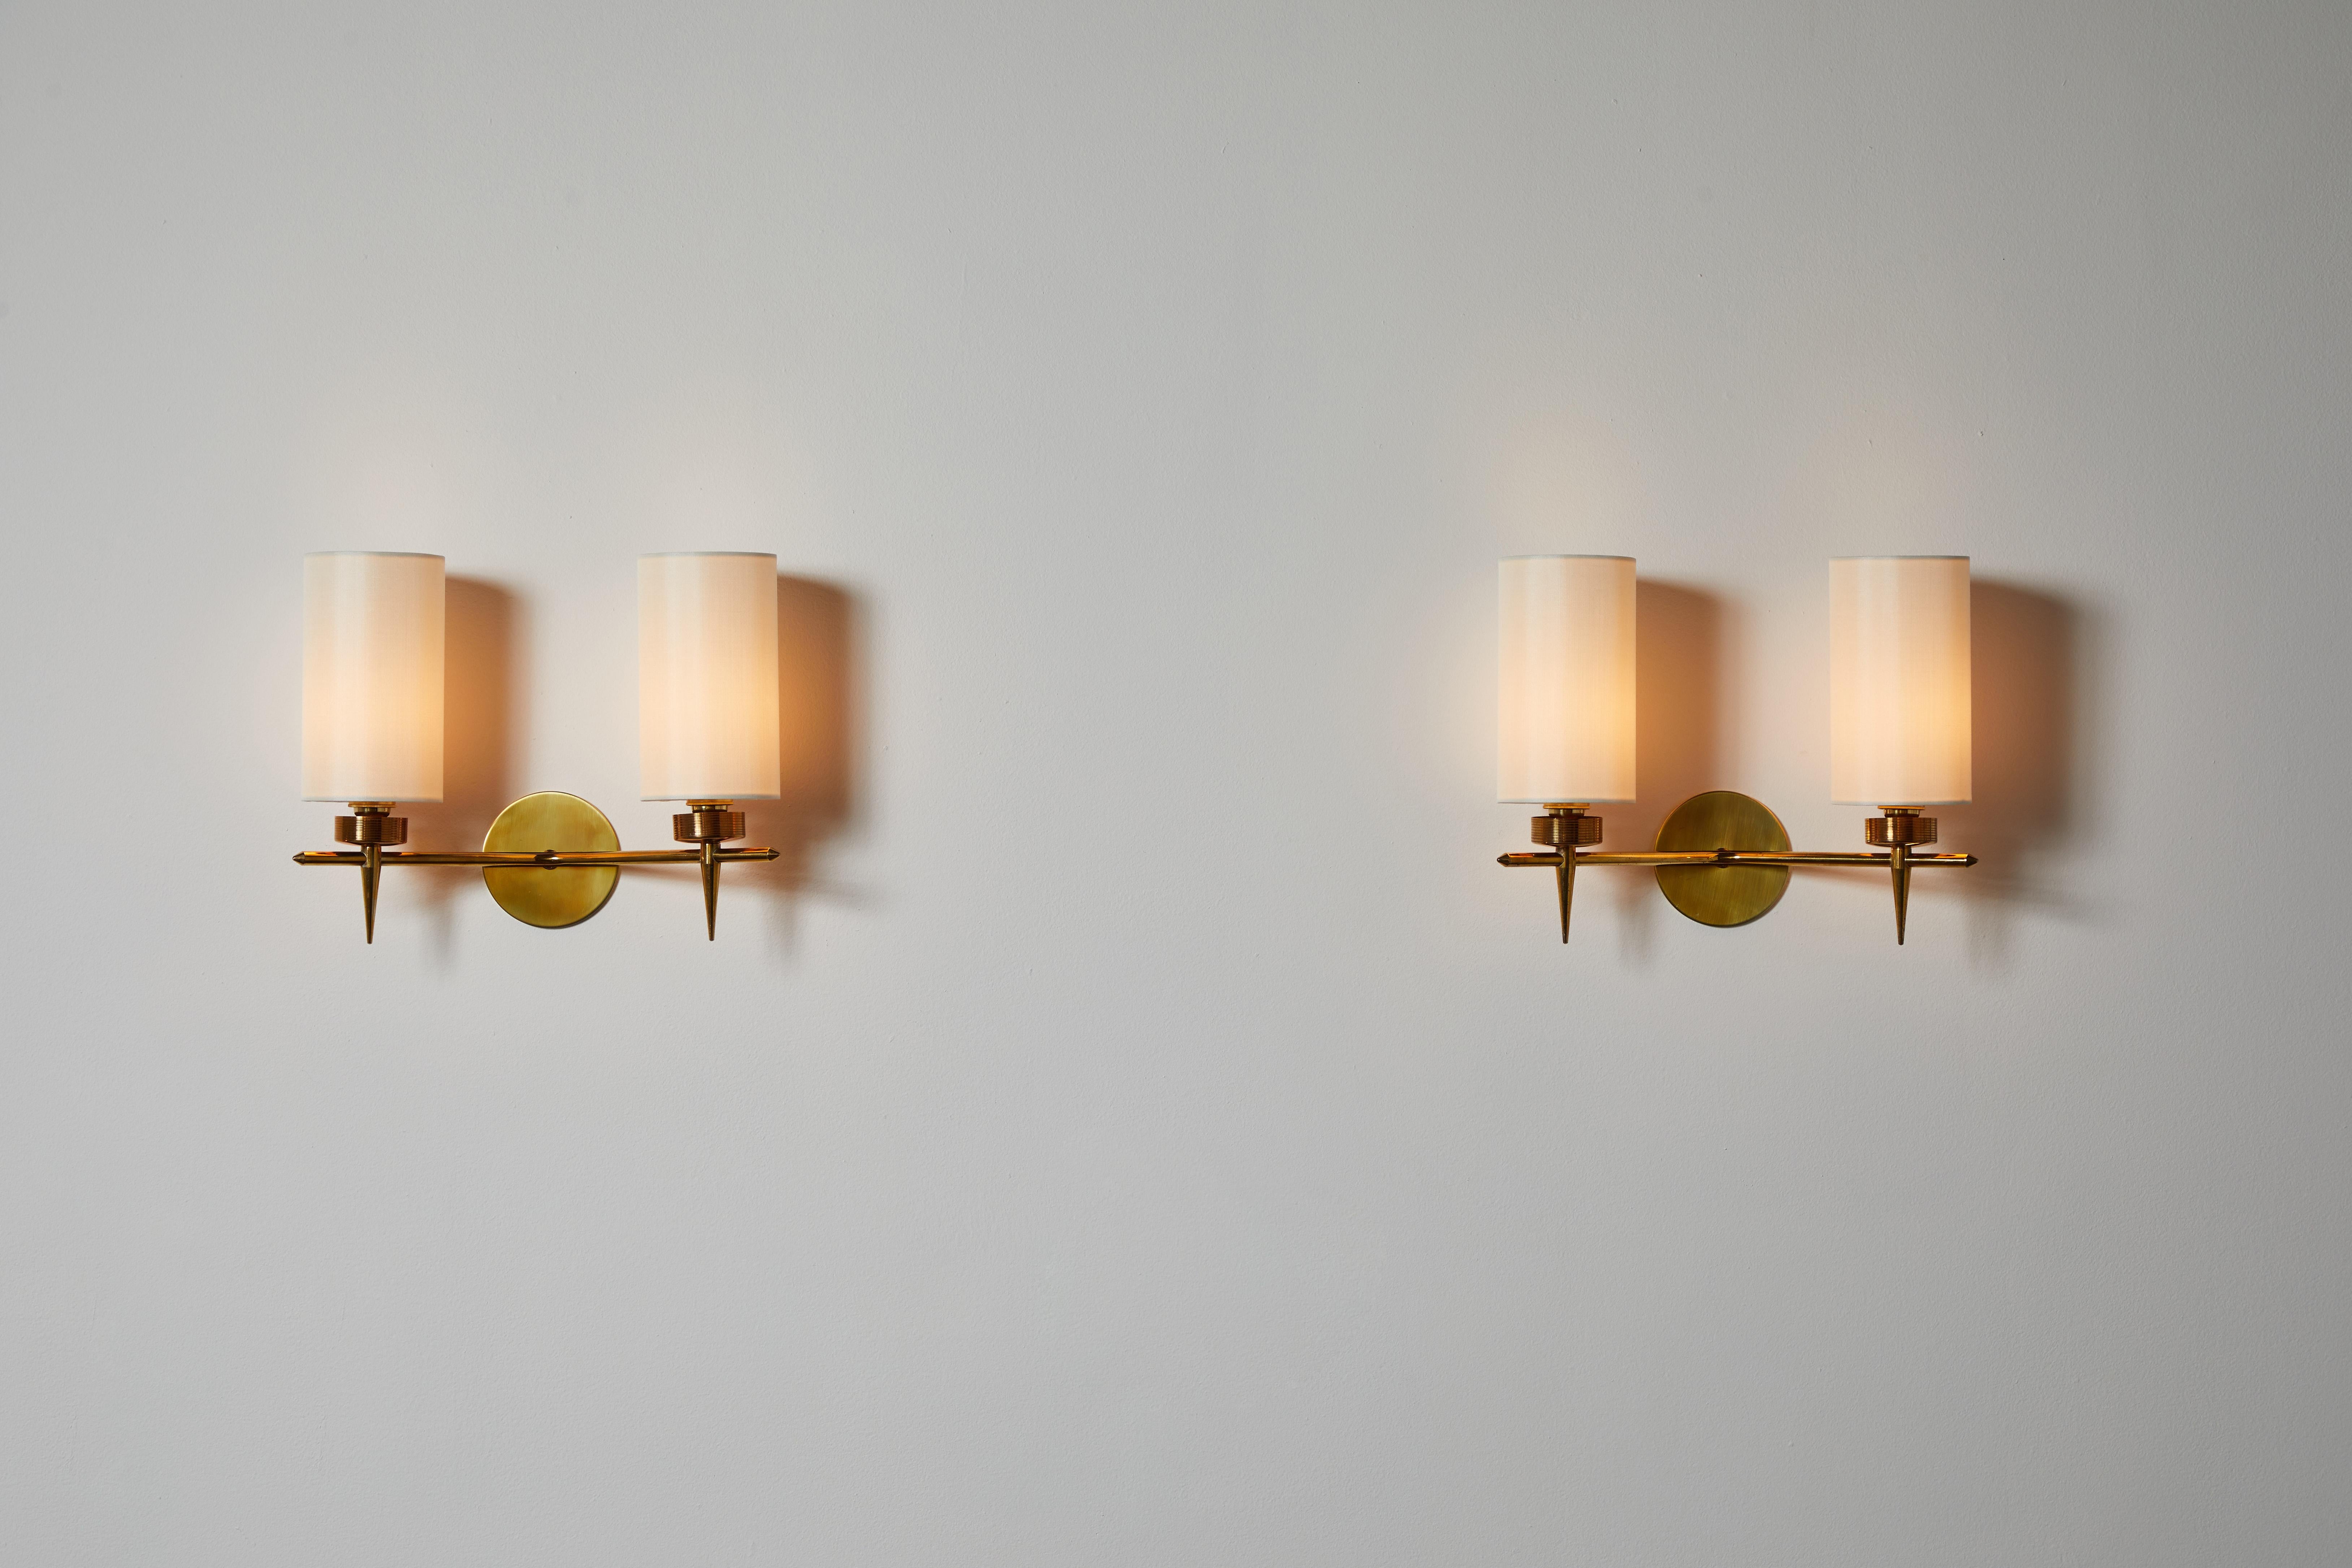 Pair of sconces by Lunel. Designed and manufactured in France, circa 1950s. Brass with custom silk shades. Rewired for U.S. standards. custom brass backplates. These fixtures have one socket each. We recommend one E27 25-40 w maximum bulb. Bulbs